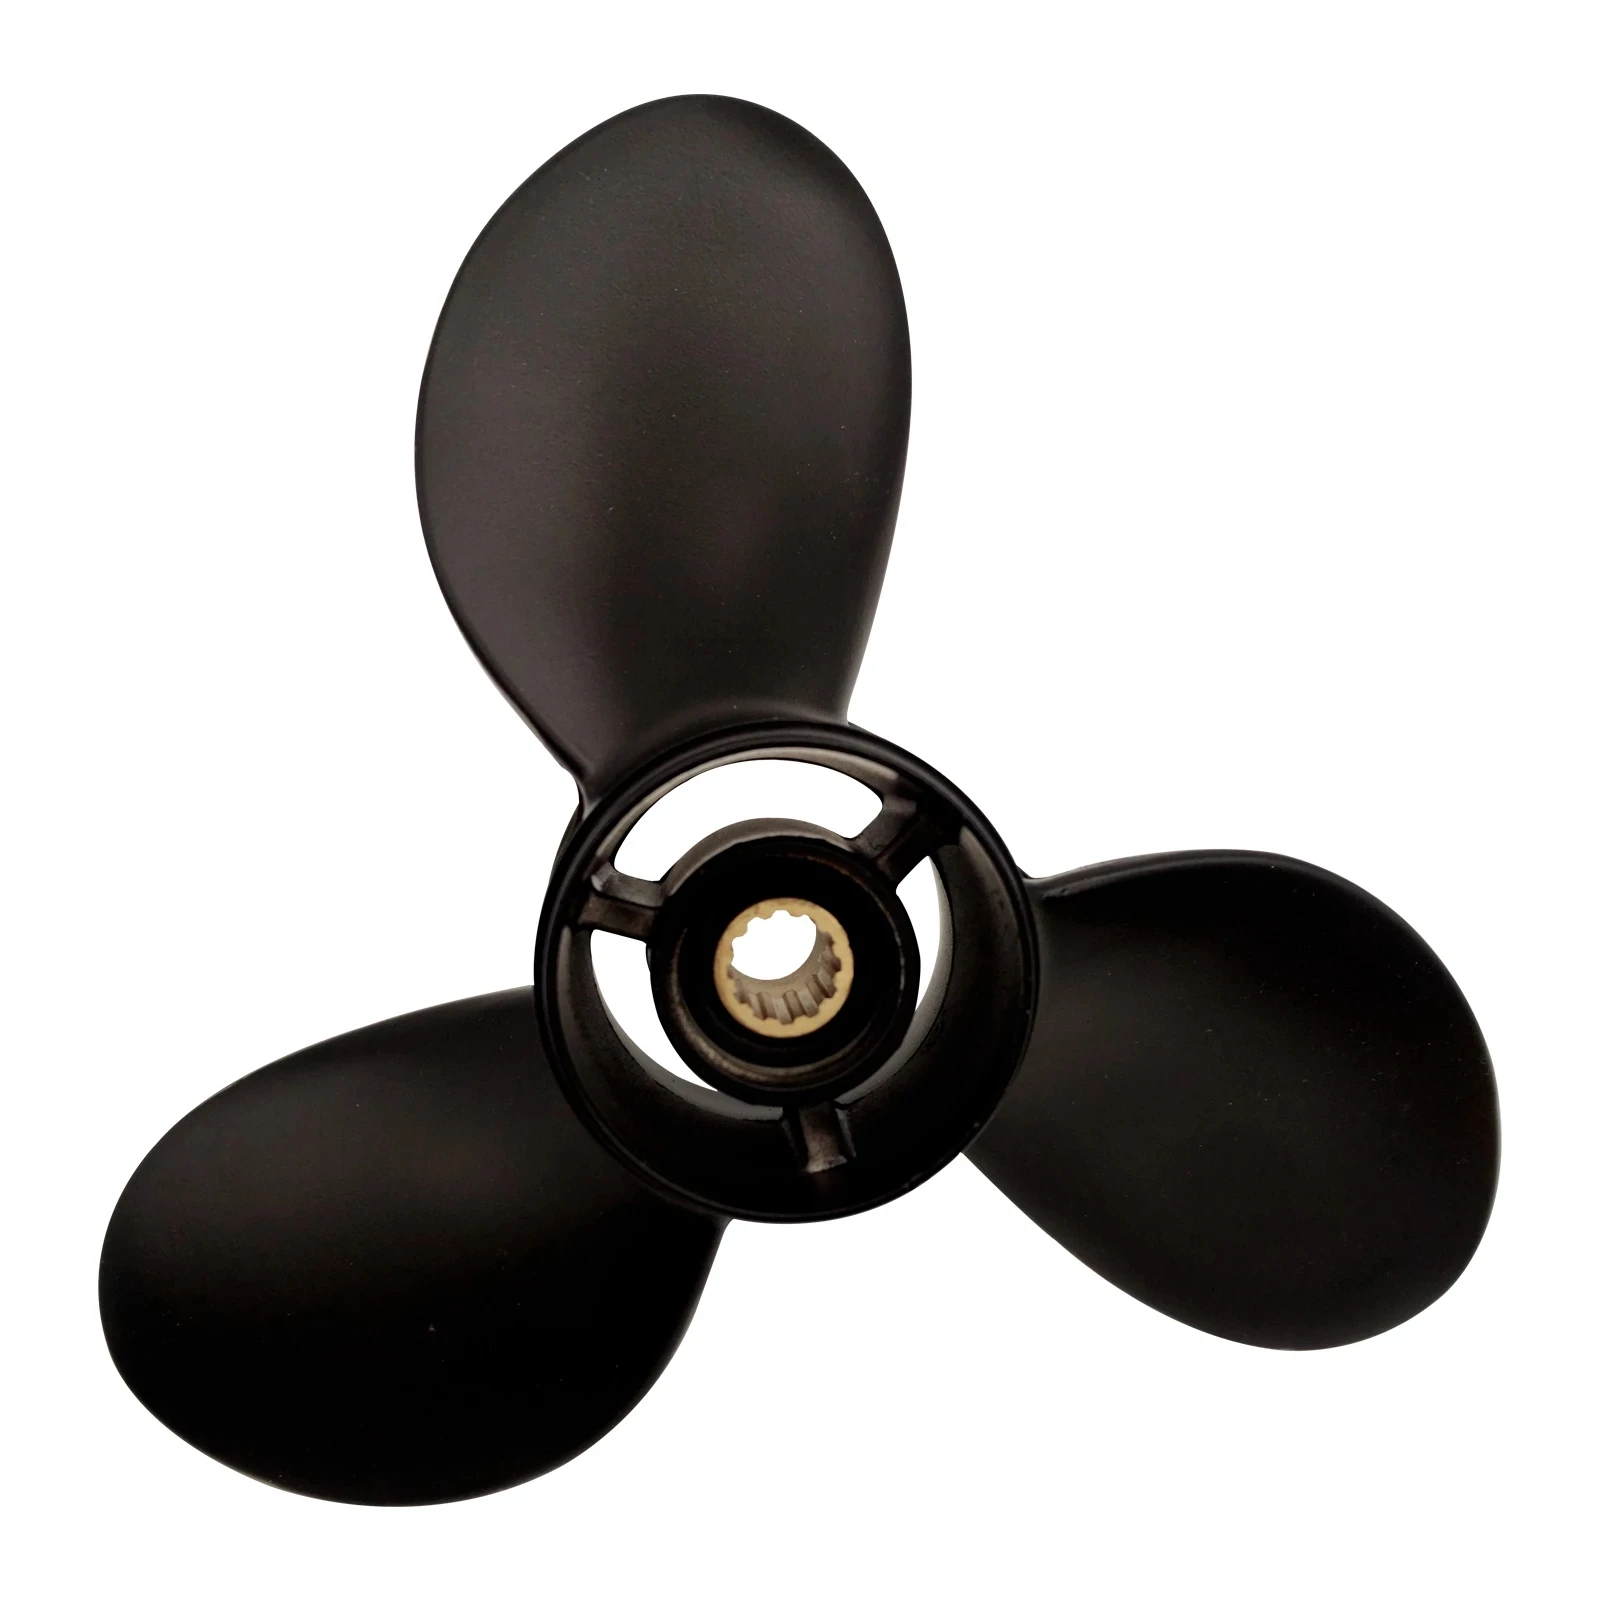 

Captain Propeller 8.9x8.5 3B2B64517-1 Fit Tohatsu Outboard Engines 8HP 9.8HP MFS8/9.8A Mercury Outboard 8HP 9.9HP 12 Splines